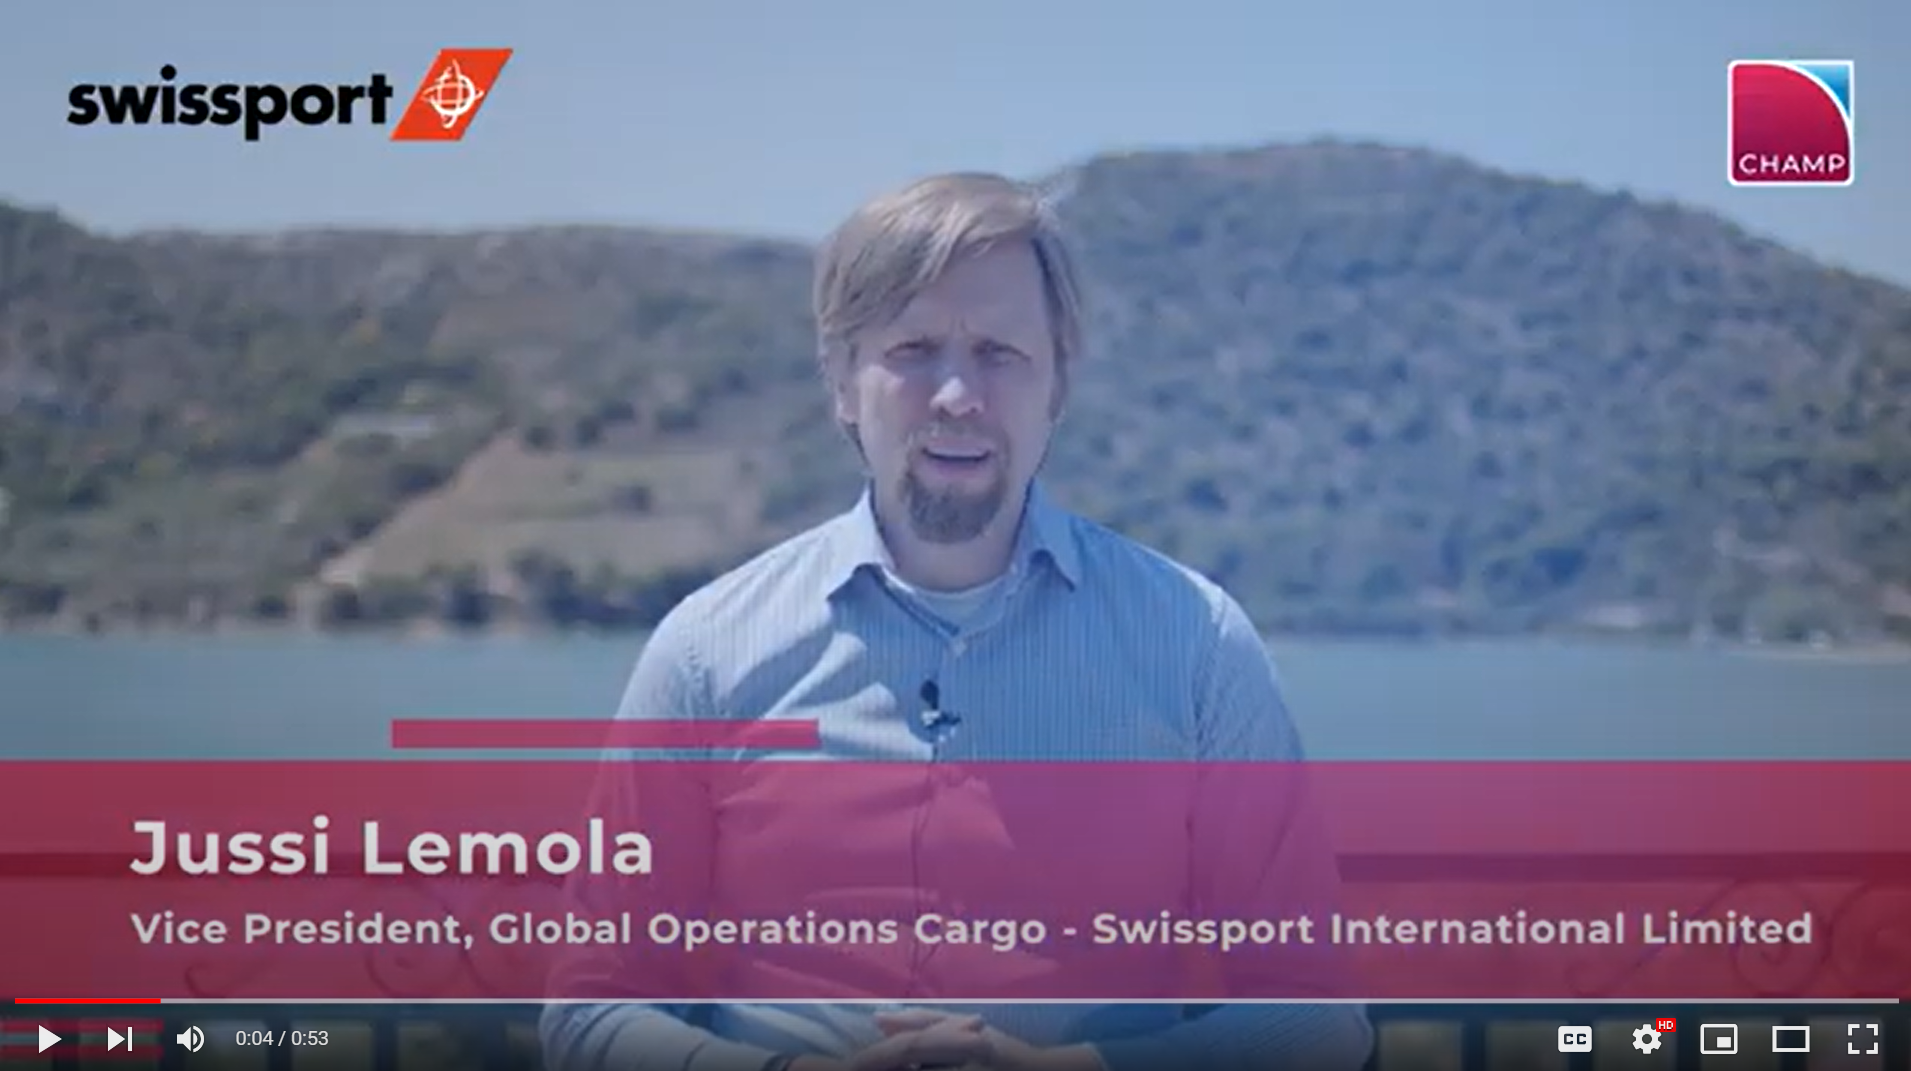 Swissport on the value of open communications